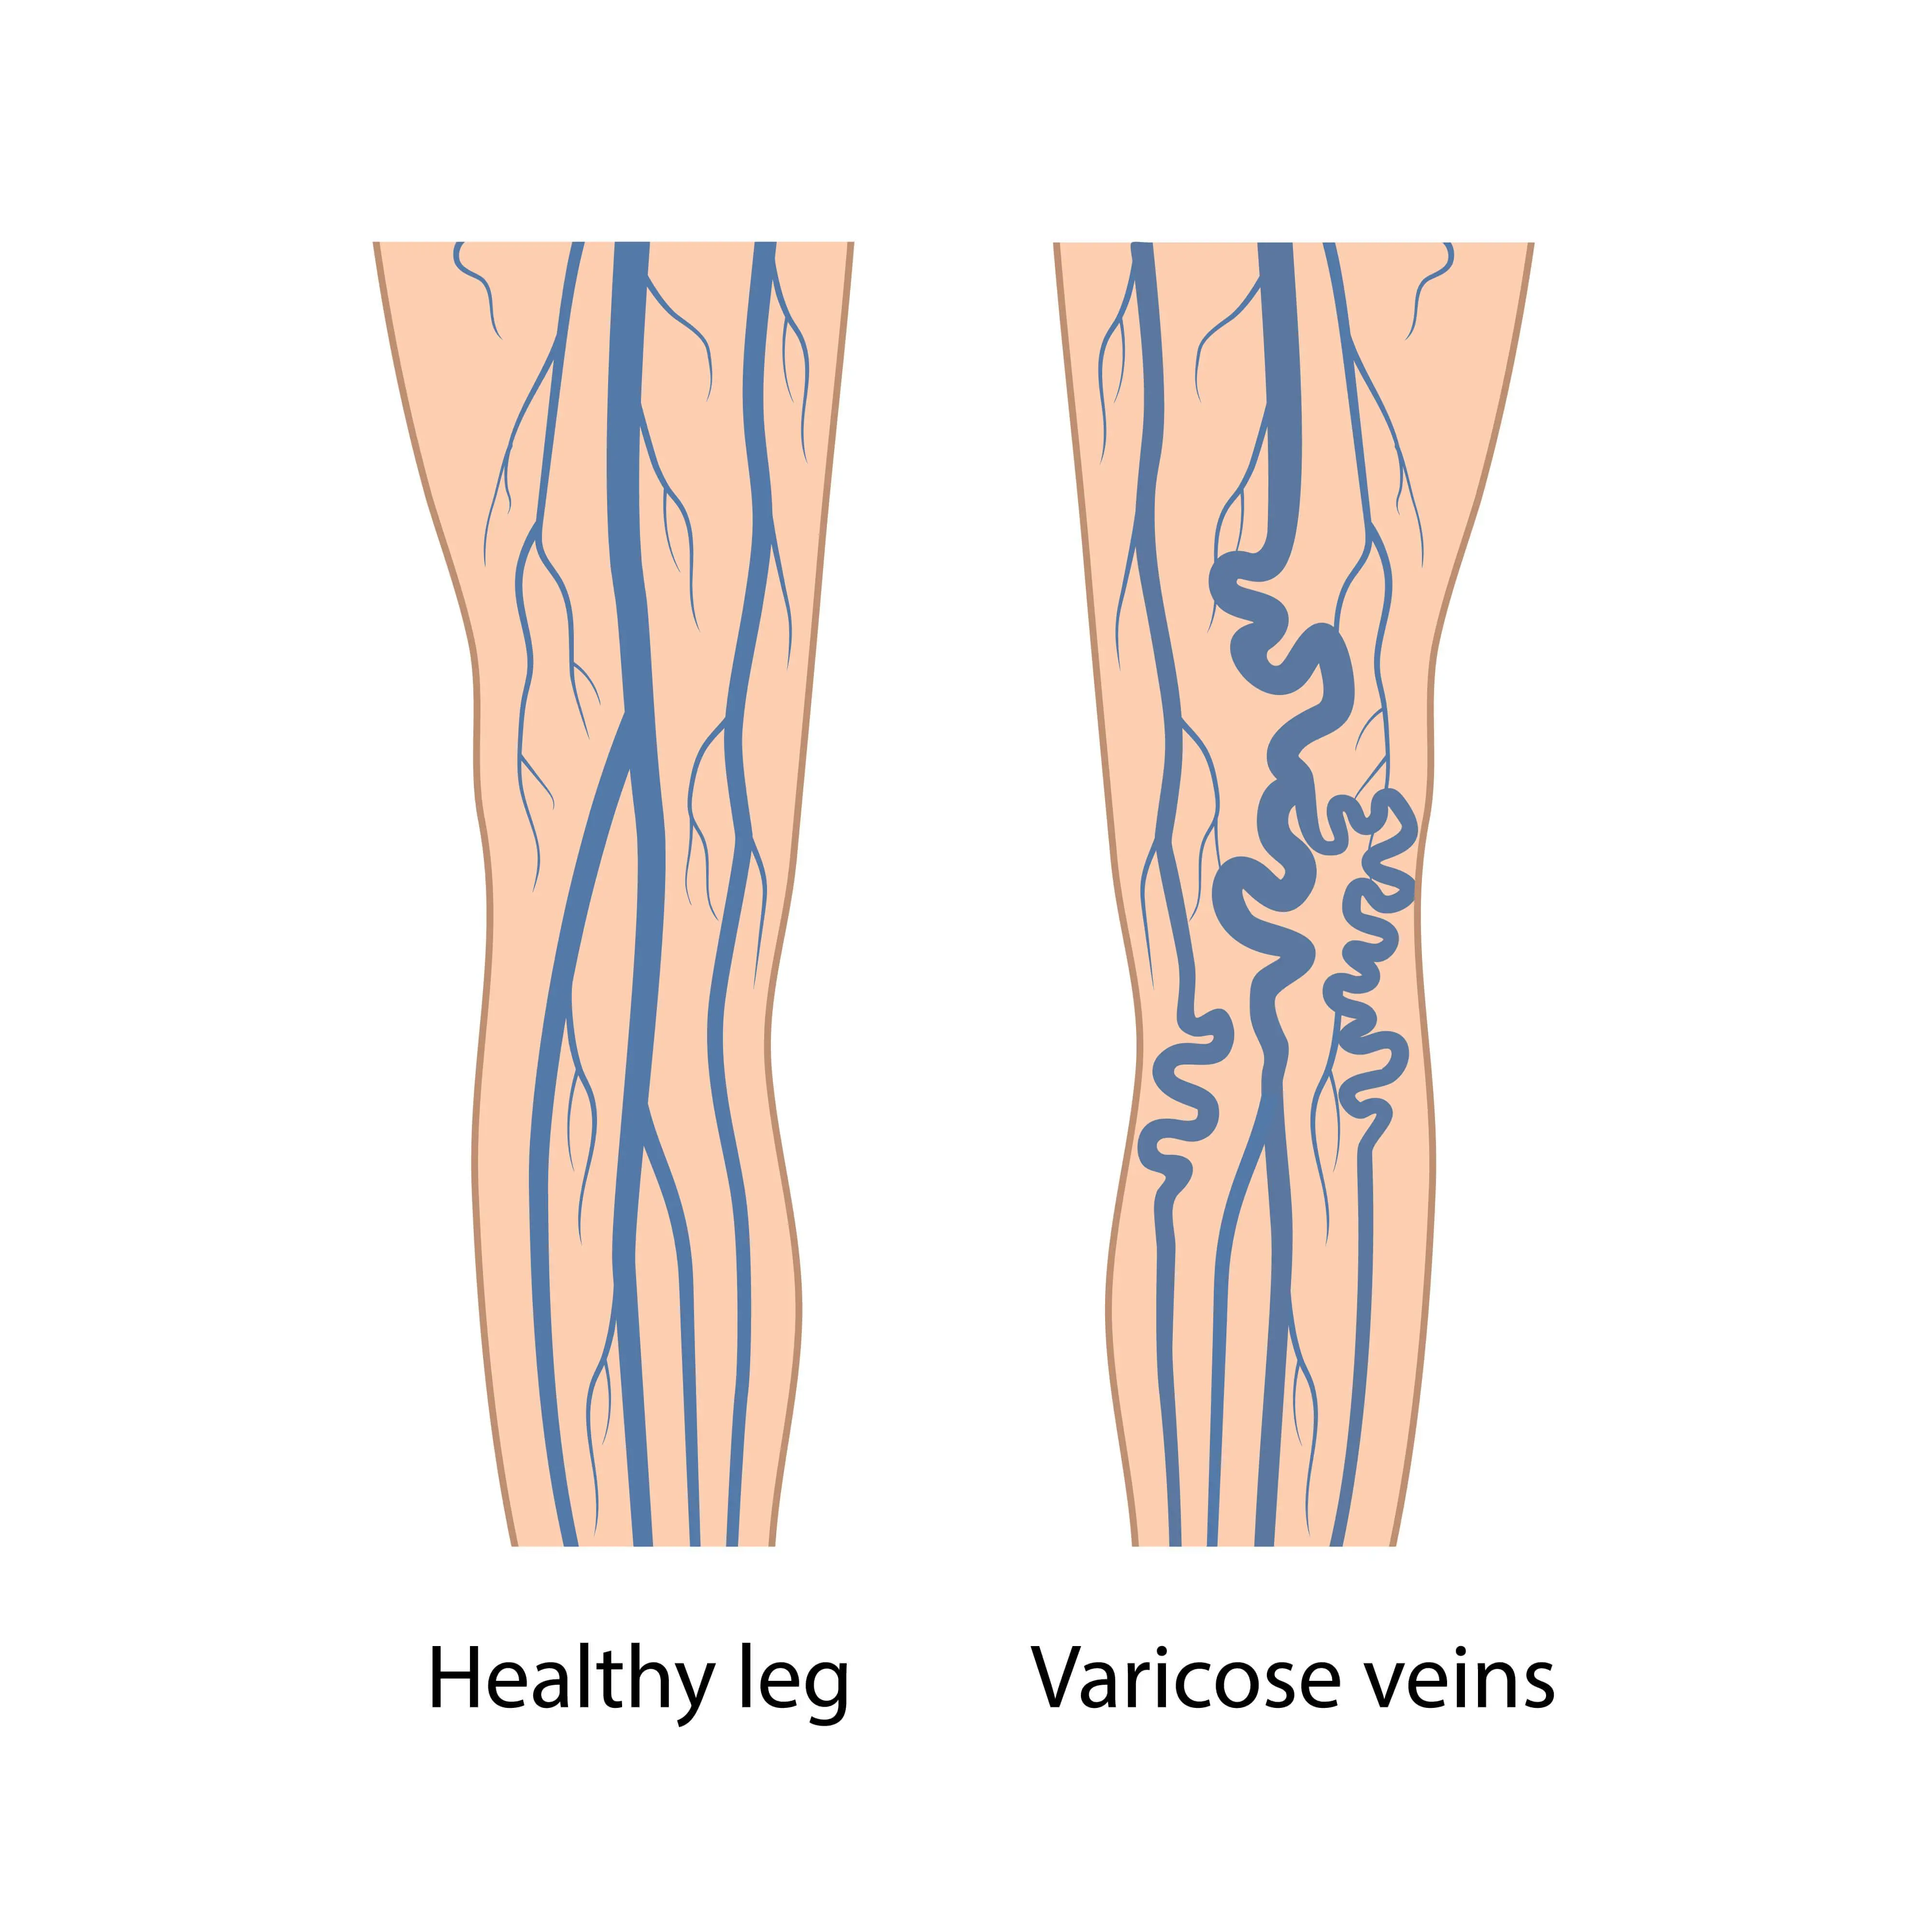 Varicose veins are enlarged and wind around.